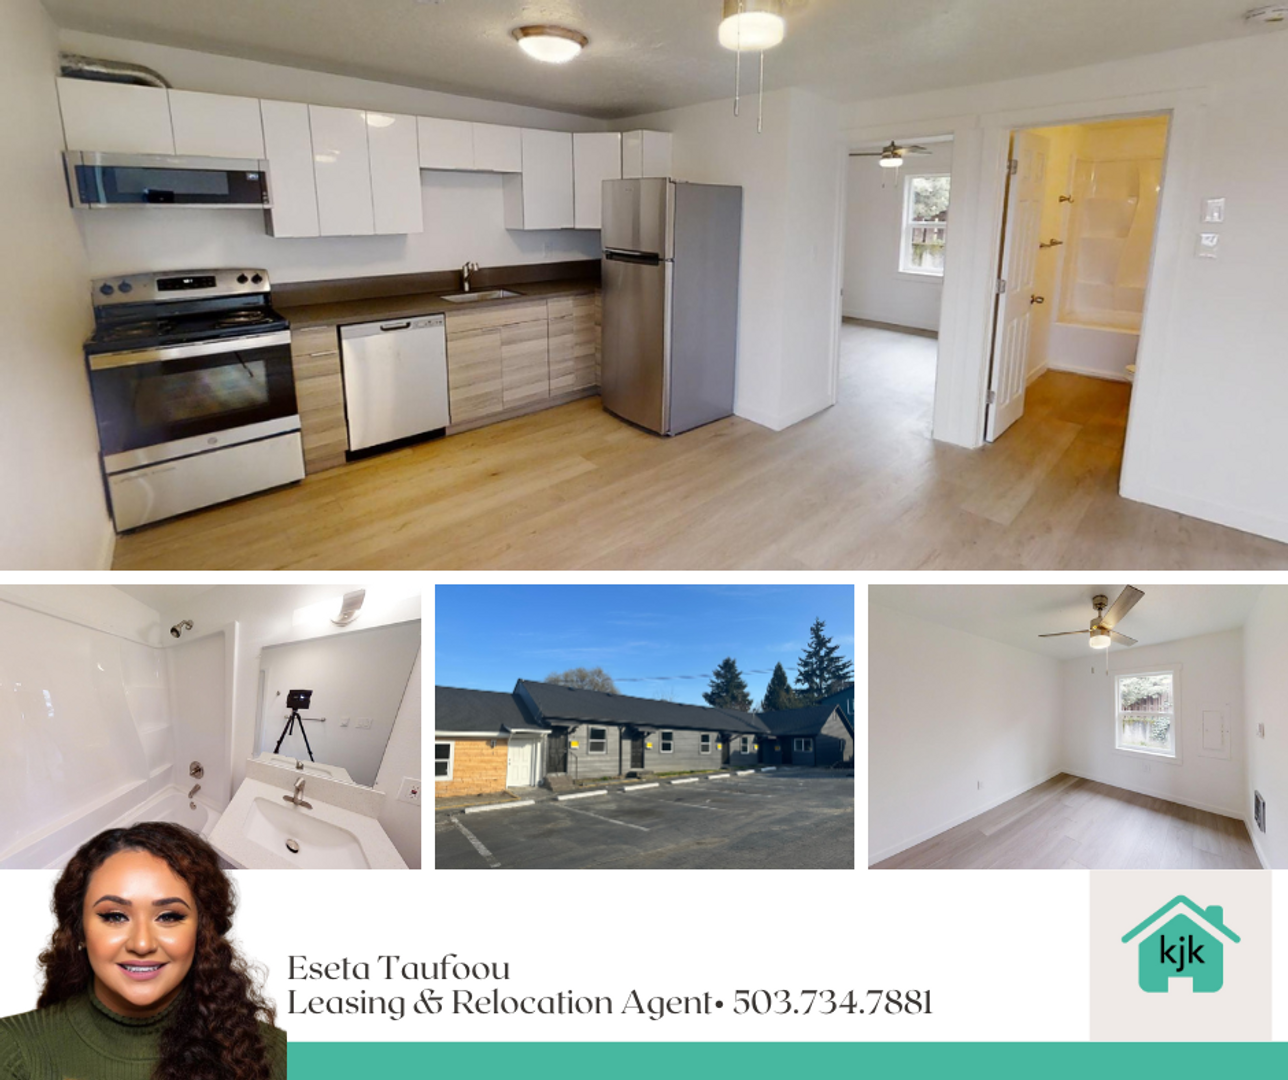 Exceptional Renovated Apartment Homes Ready to Lease! Don't Delay Apply Today!